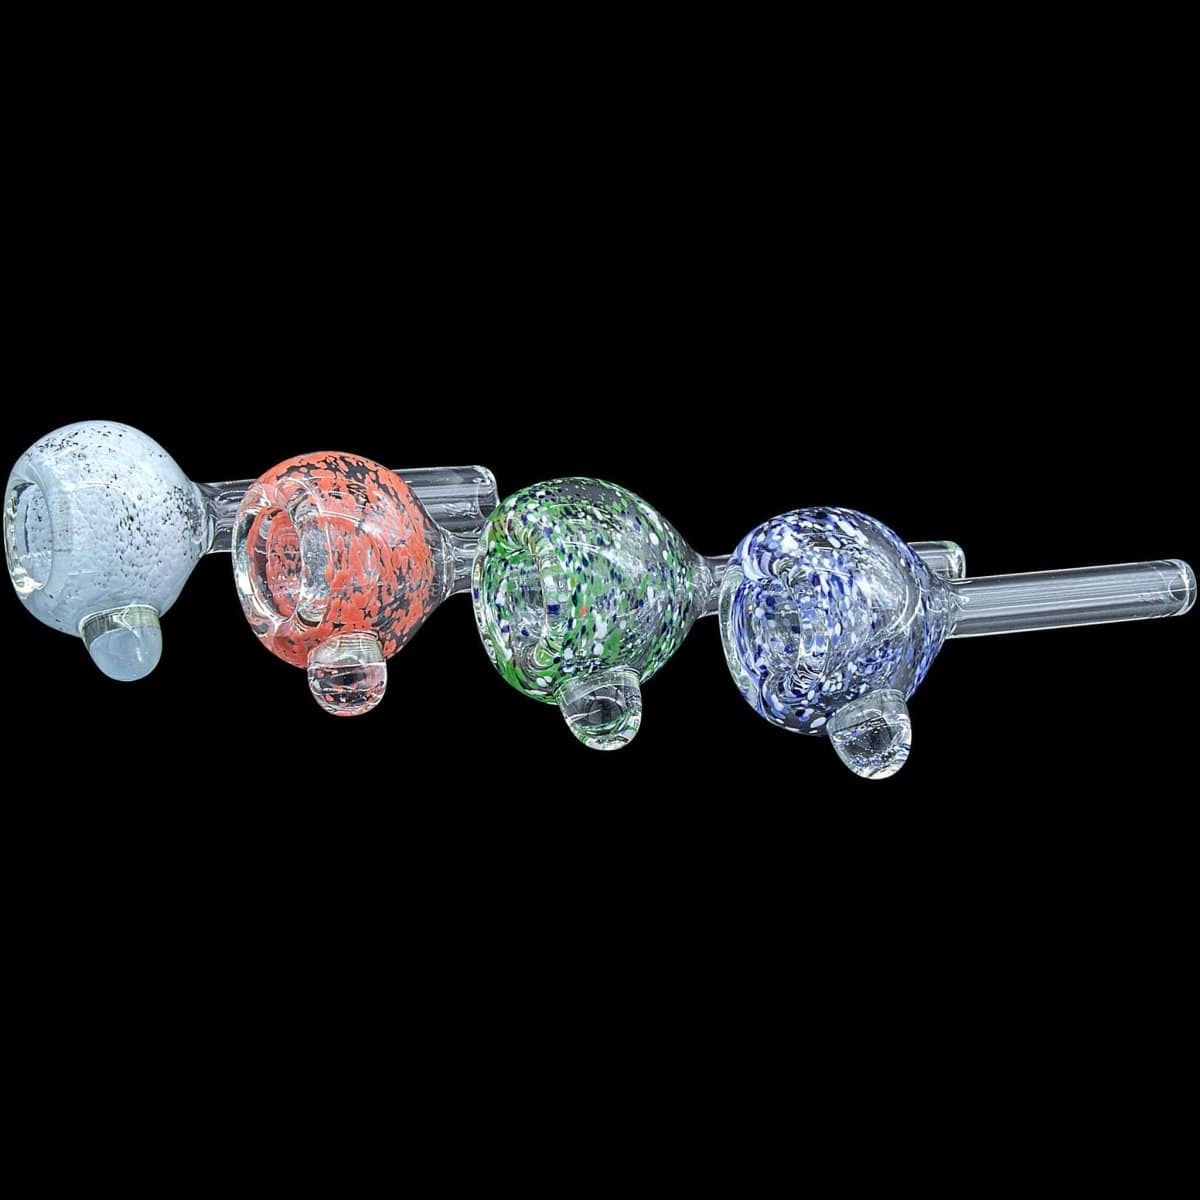 LA Pipes Smoking Accessory Frit Bubble Bowl 9mm Pull-Stem Slide (Various Colors)